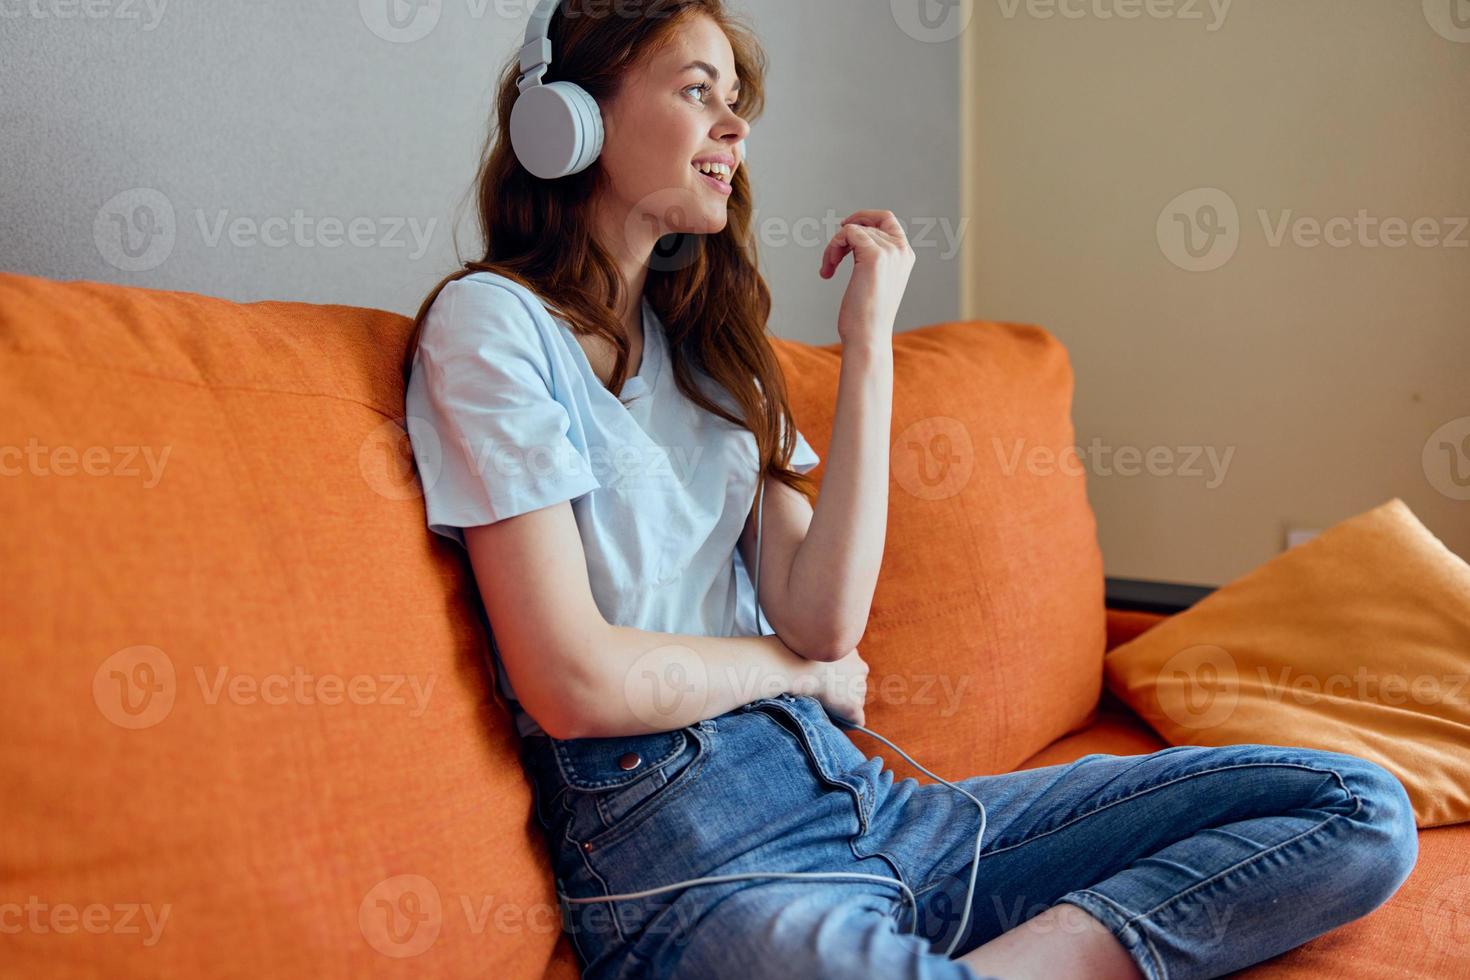 smiling woman listening to music with headphones on the orange sofa technologies photo